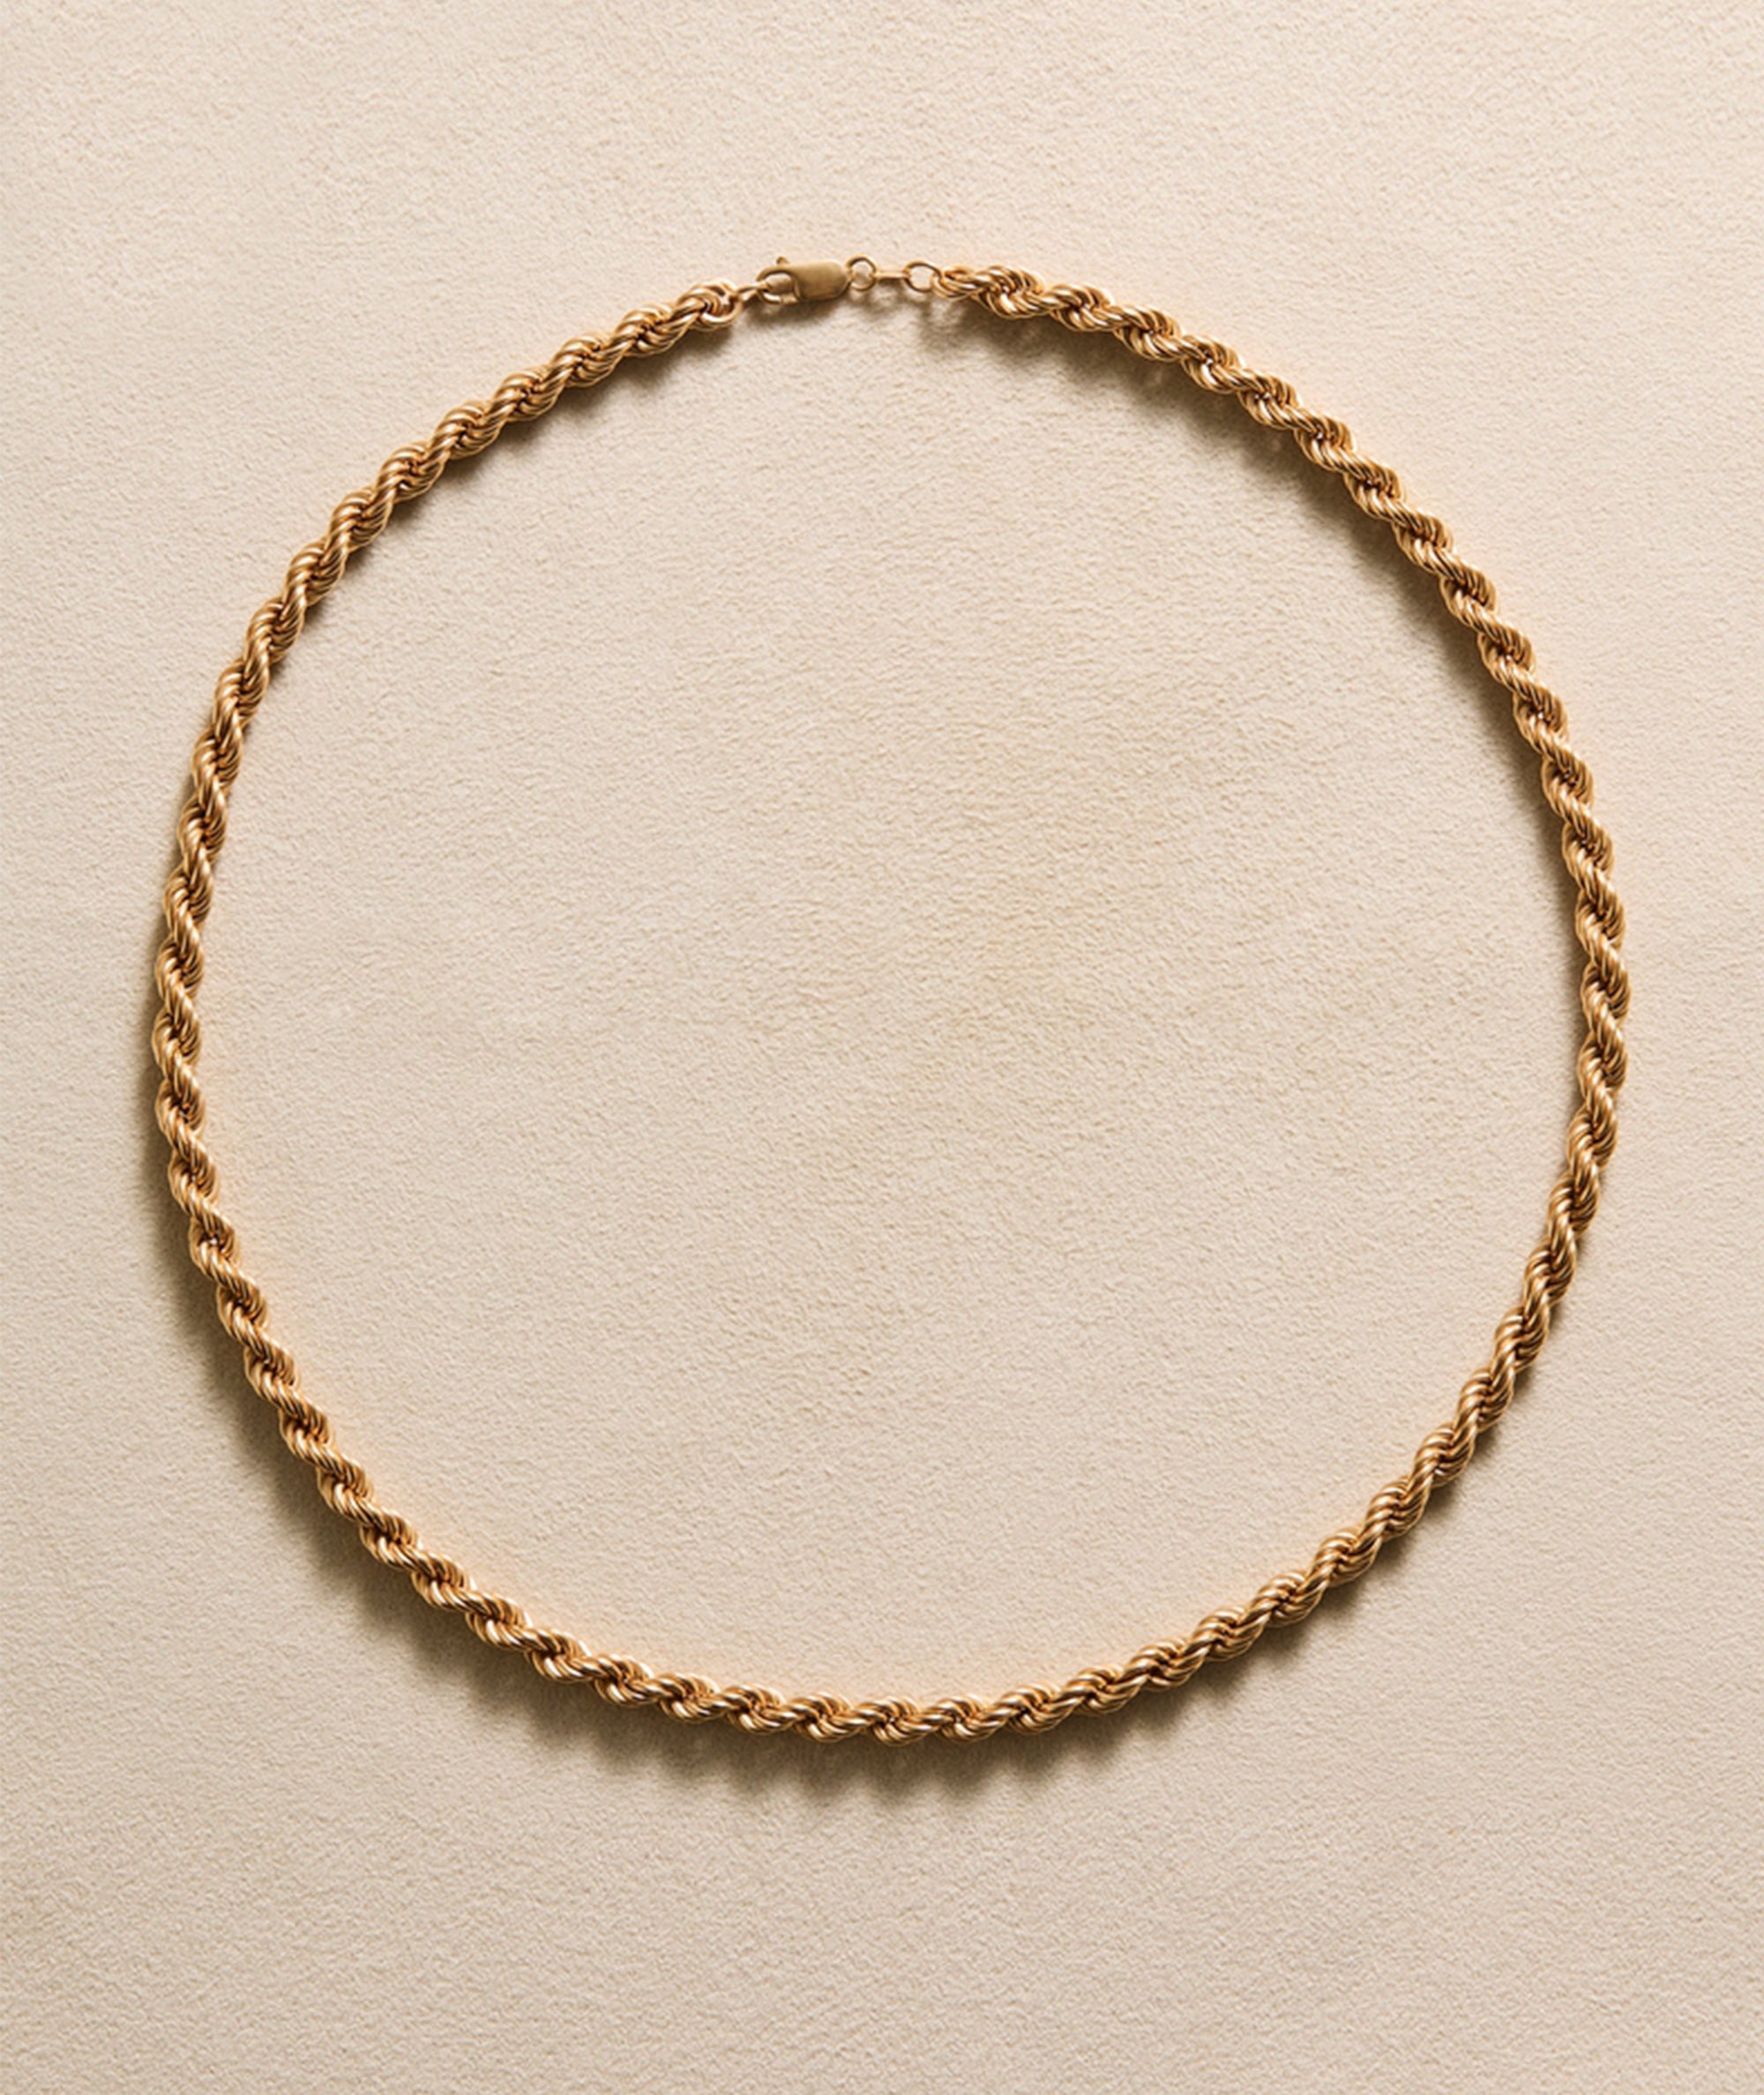 Vintage chain necklace in yellow gold. Exclusively sourced for EREDE Curated.